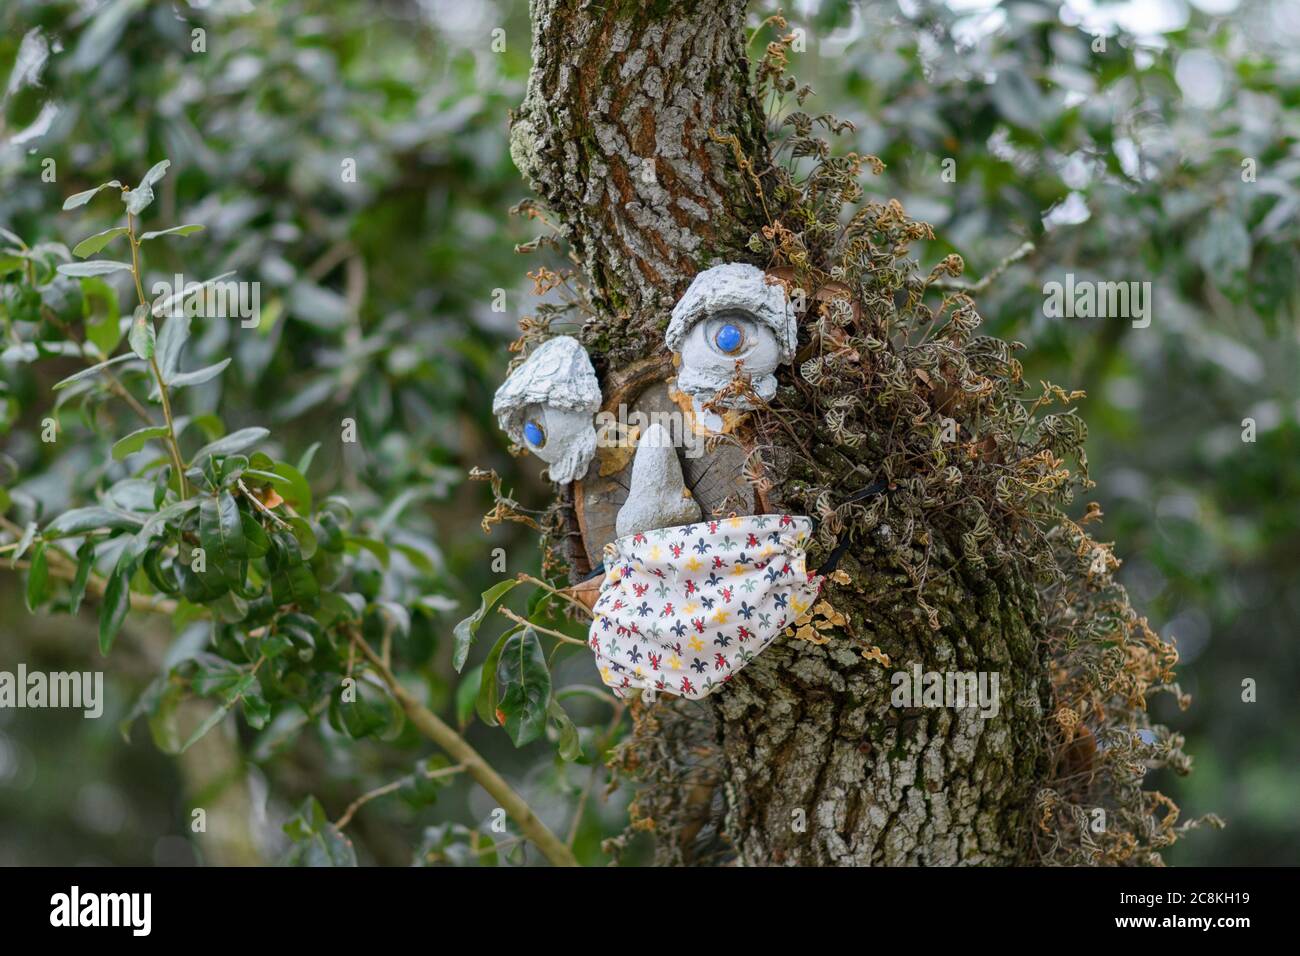 Tree Decorated with Face and Face Mask during Covid-19 Pandemic Stock Photo